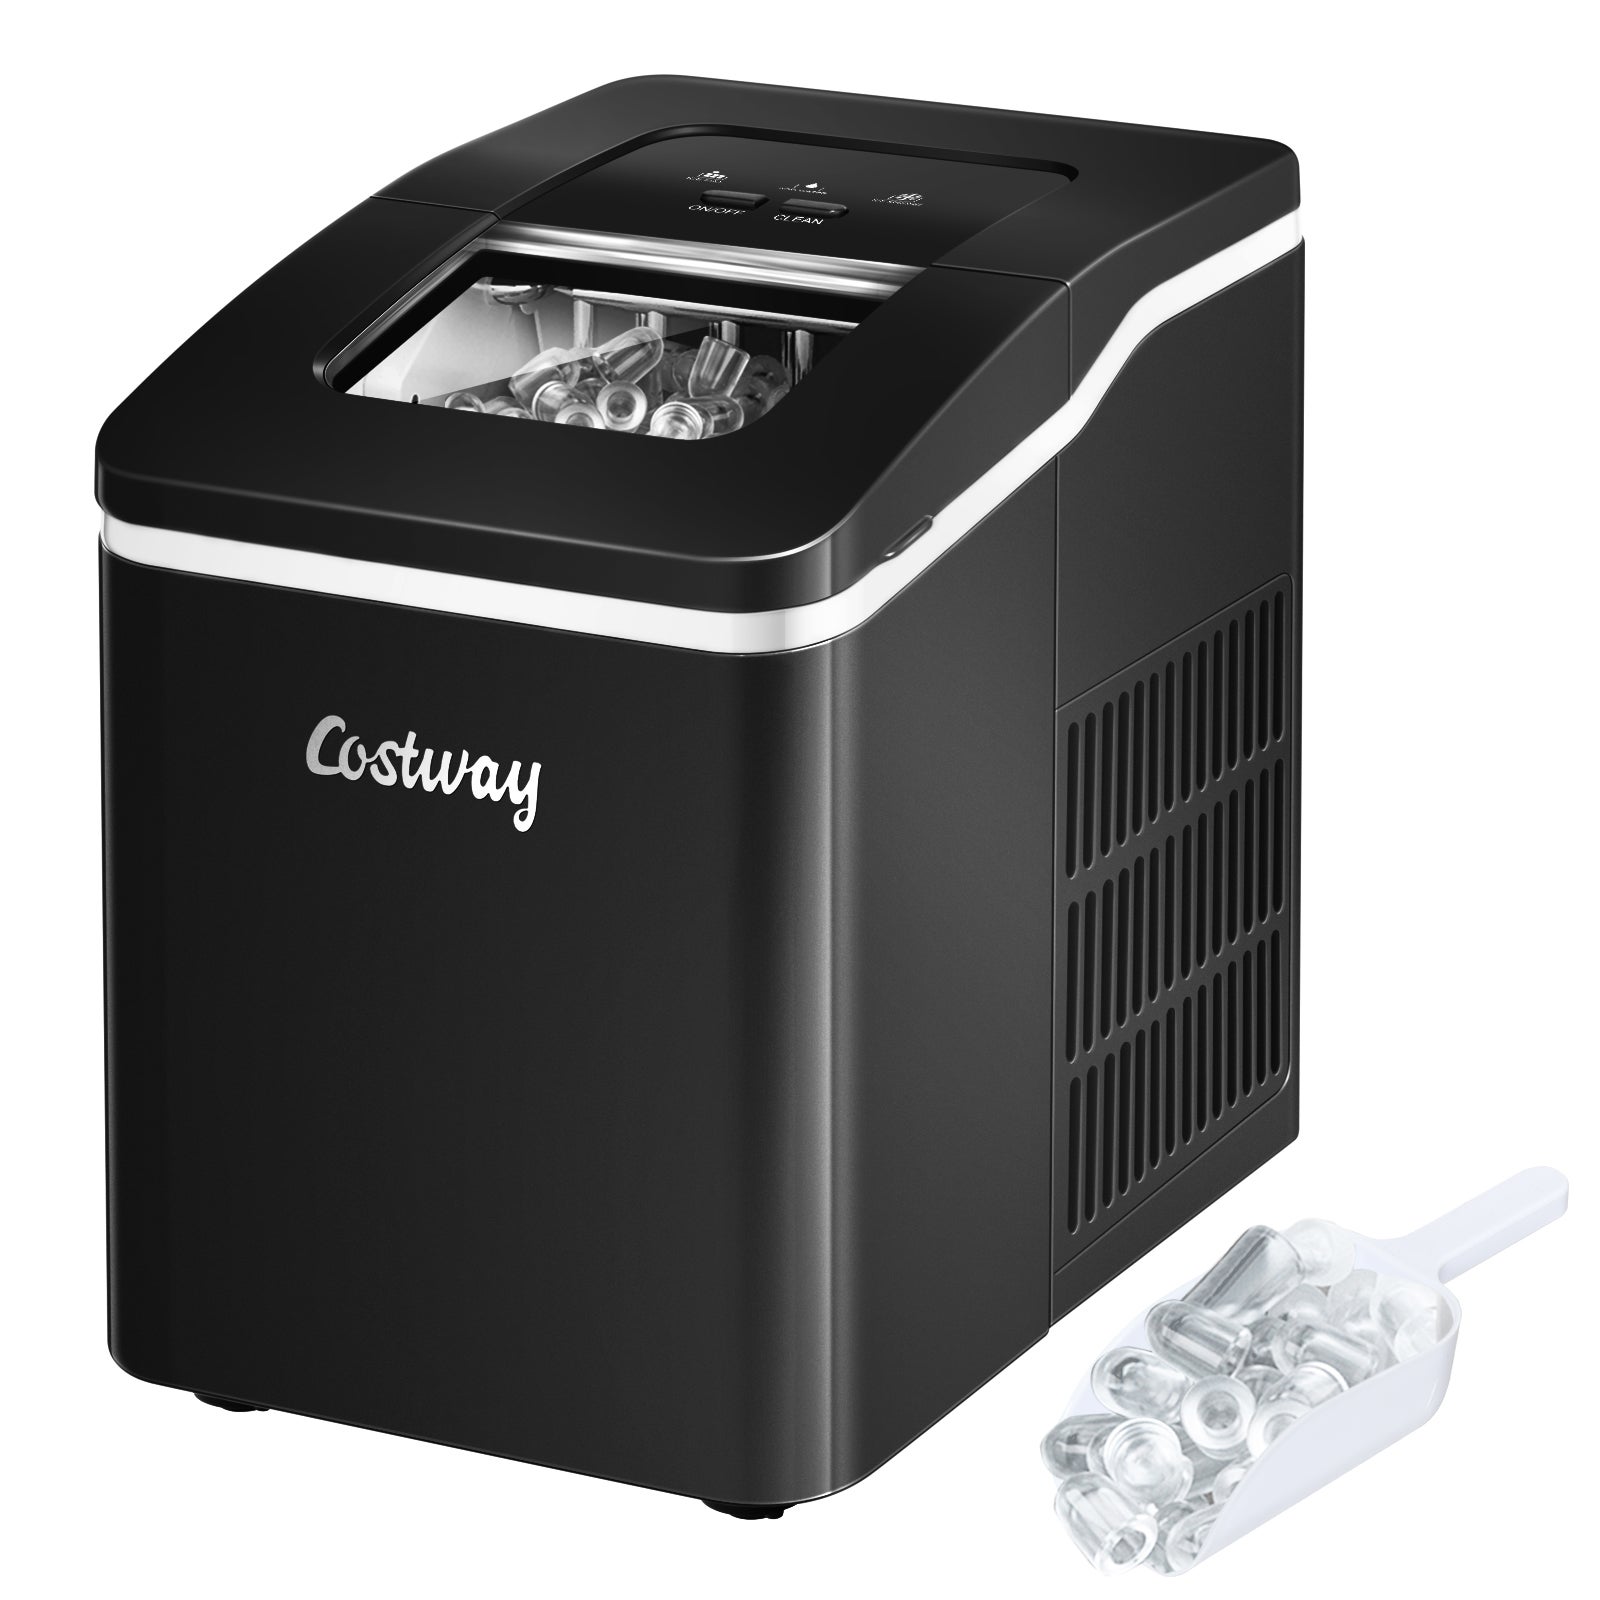 Costway Portable Ice Maker Ice Cube Machine Countertop Bar Cafe w/Scoop, Black